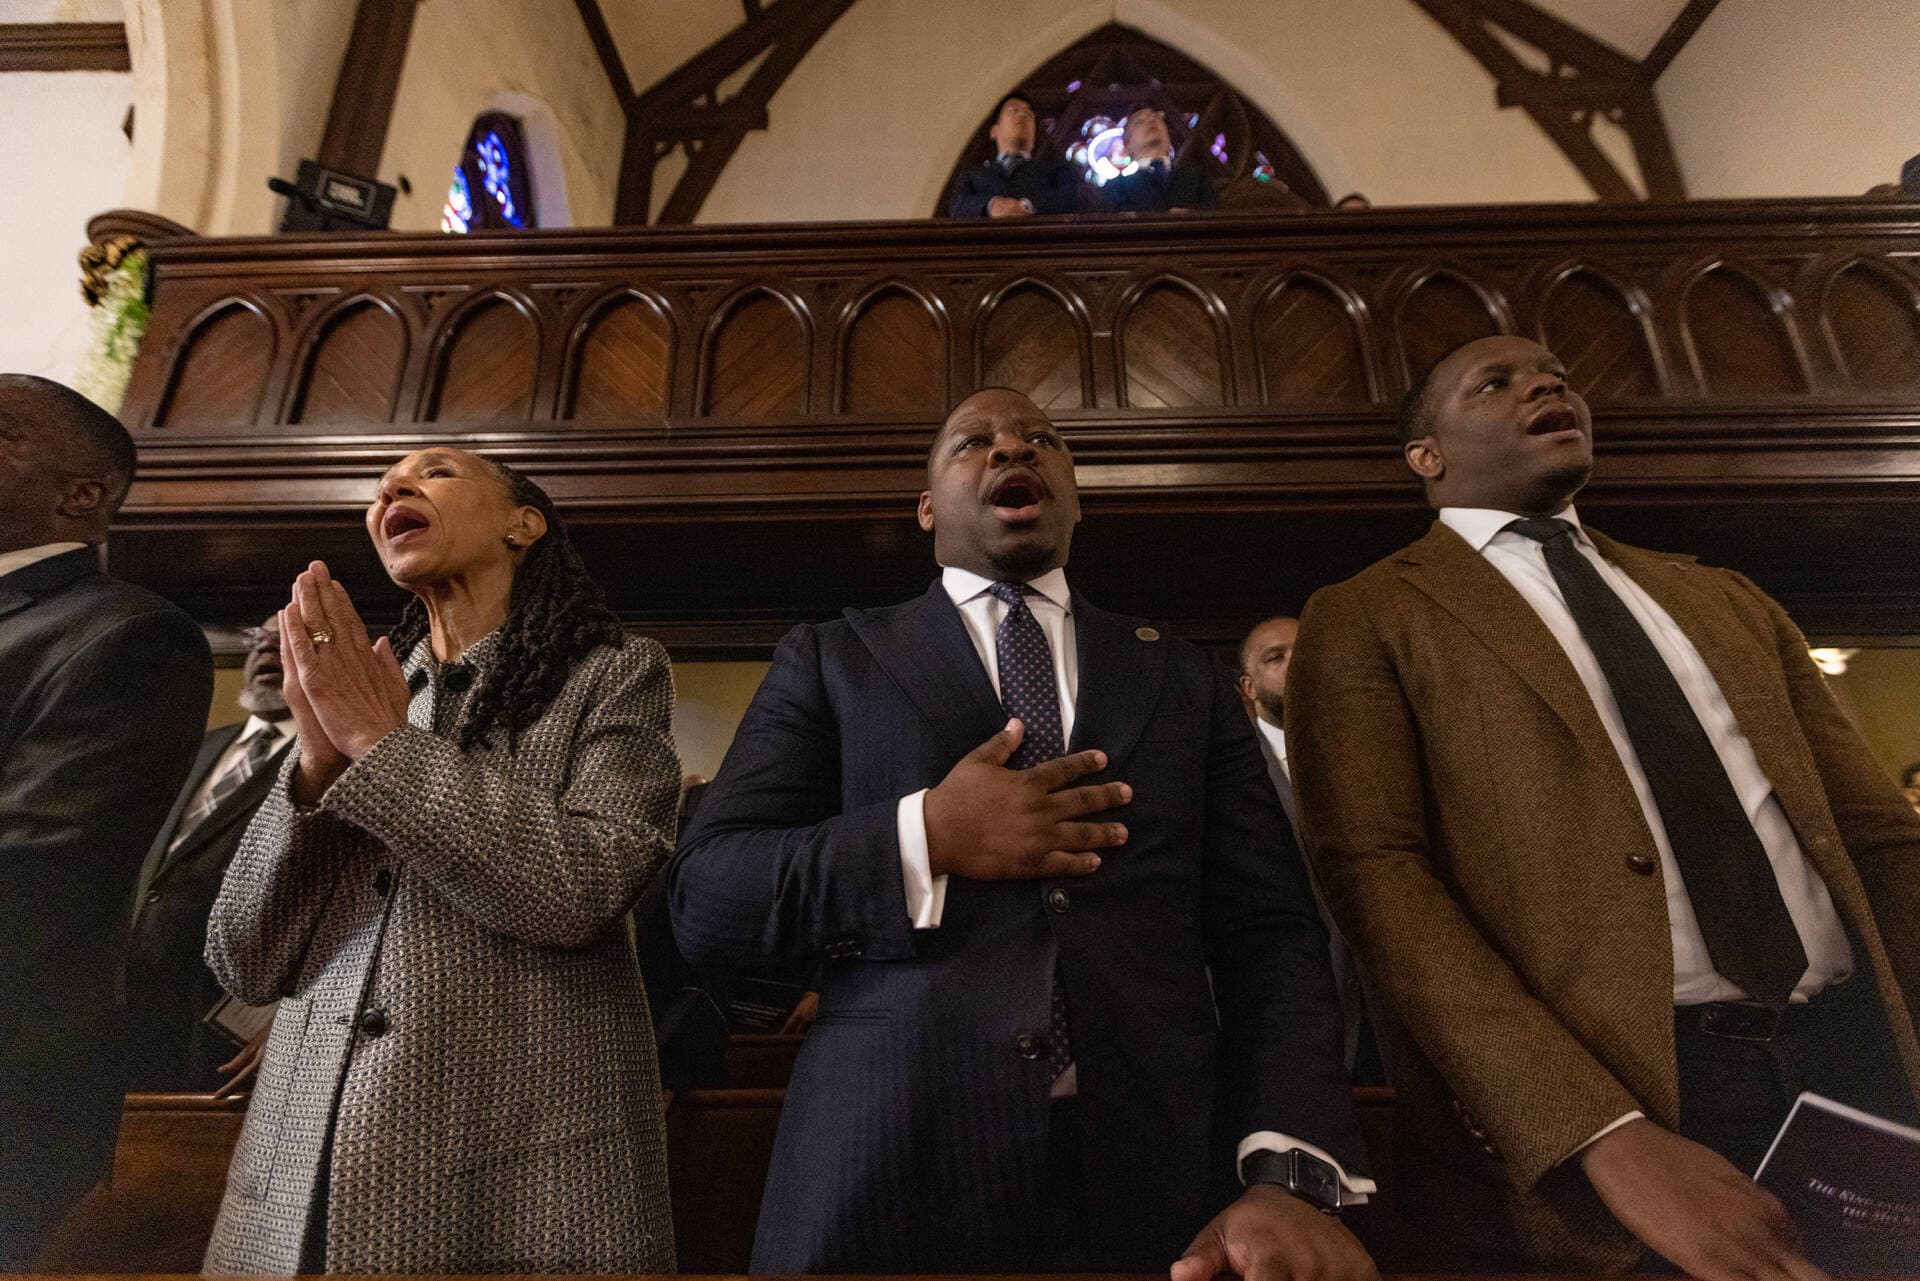 Visiting clergy join in singing the opening hymn, Lift Every Voice and Sing” during the funeral service of Mel King at Union United Methodist Church in the South End. (Jesse Costa/WBUR)